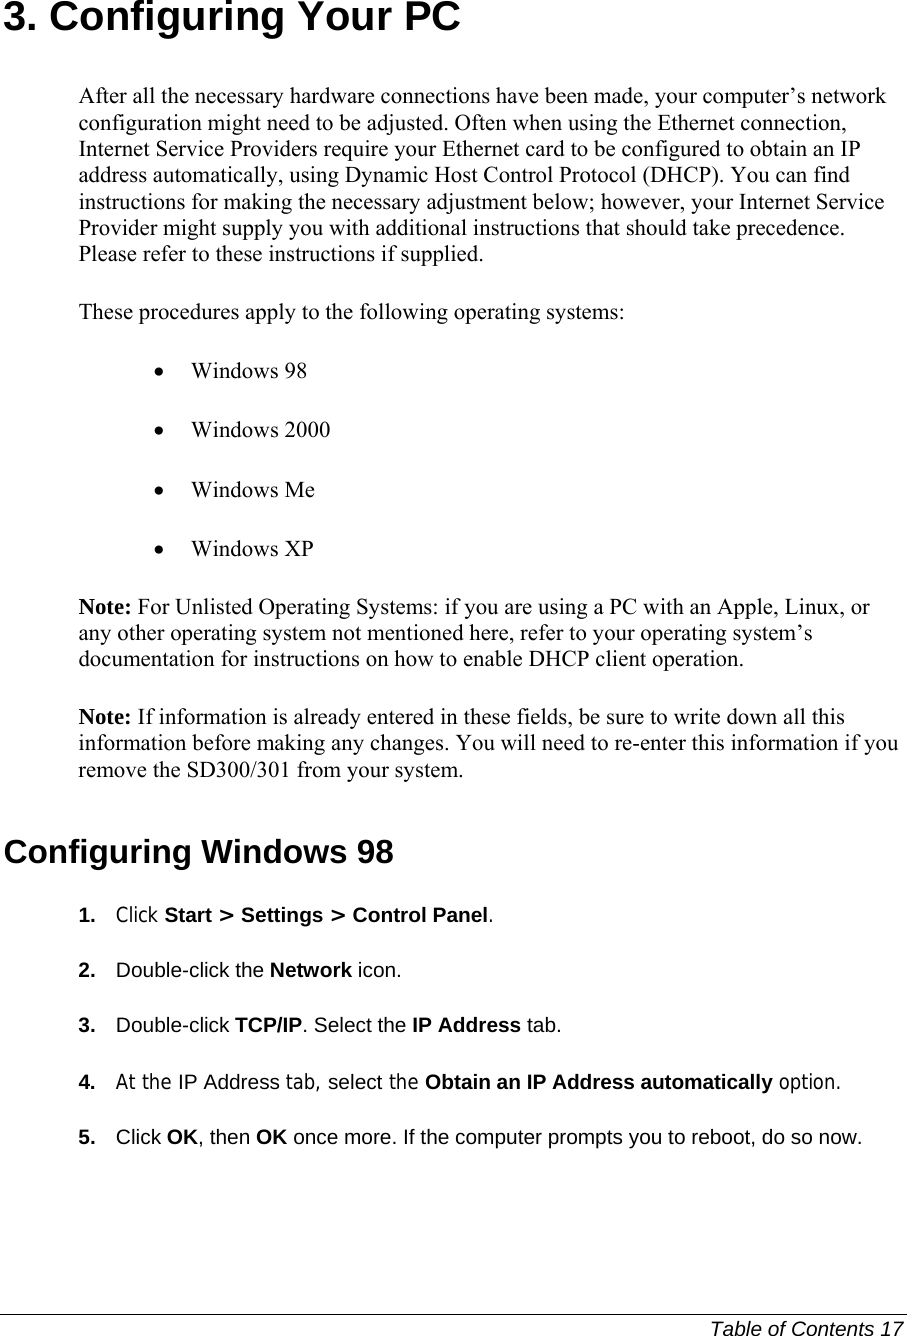   Table of Contents 17  3. Configuring Your PC After all the necessary hardware connections have been made, your computer’s network configuration might need to be adjusted. Often when using the Ethernet connection, Internet Service Providers require your Ethernet card to be configured to obtain an IP address automatically, using Dynamic Host Control Protocol (DHCP). You can find instructions for making the necessary adjustment below; however, your Internet Service Provider might supply you with additional instructions that should take precedence. Please refer to these instructions if supplied. These procedures apply to the following operating systems: • Windows 98  • Windows 2000  • Windows Me  • Windows XP  Note: For Unlisted Operating Systems: if you are using a PC with an Apple, Linux, or any other operating system not mentioned here, refer to your operating system’s documentation for instructions on how to enable DHCP client operation.  Note: If information is already entered in these fields, be sure to write down all this information before making any changes. You will need to re-enter this information if you remove the SD300/301 from your system. Configuring Windows 98 1.  Click Start &gt; Settings &gt; Control Panel.  2.  Double-click the Network icon.  3.  Double-click TCP/IP. Select the IP Address tab.  4.  At the IP Address tab, select the Obtain an IP Address automatically option.  5.  Click OK, then OK once more. If the computer prompts you to reboot, do so now.  